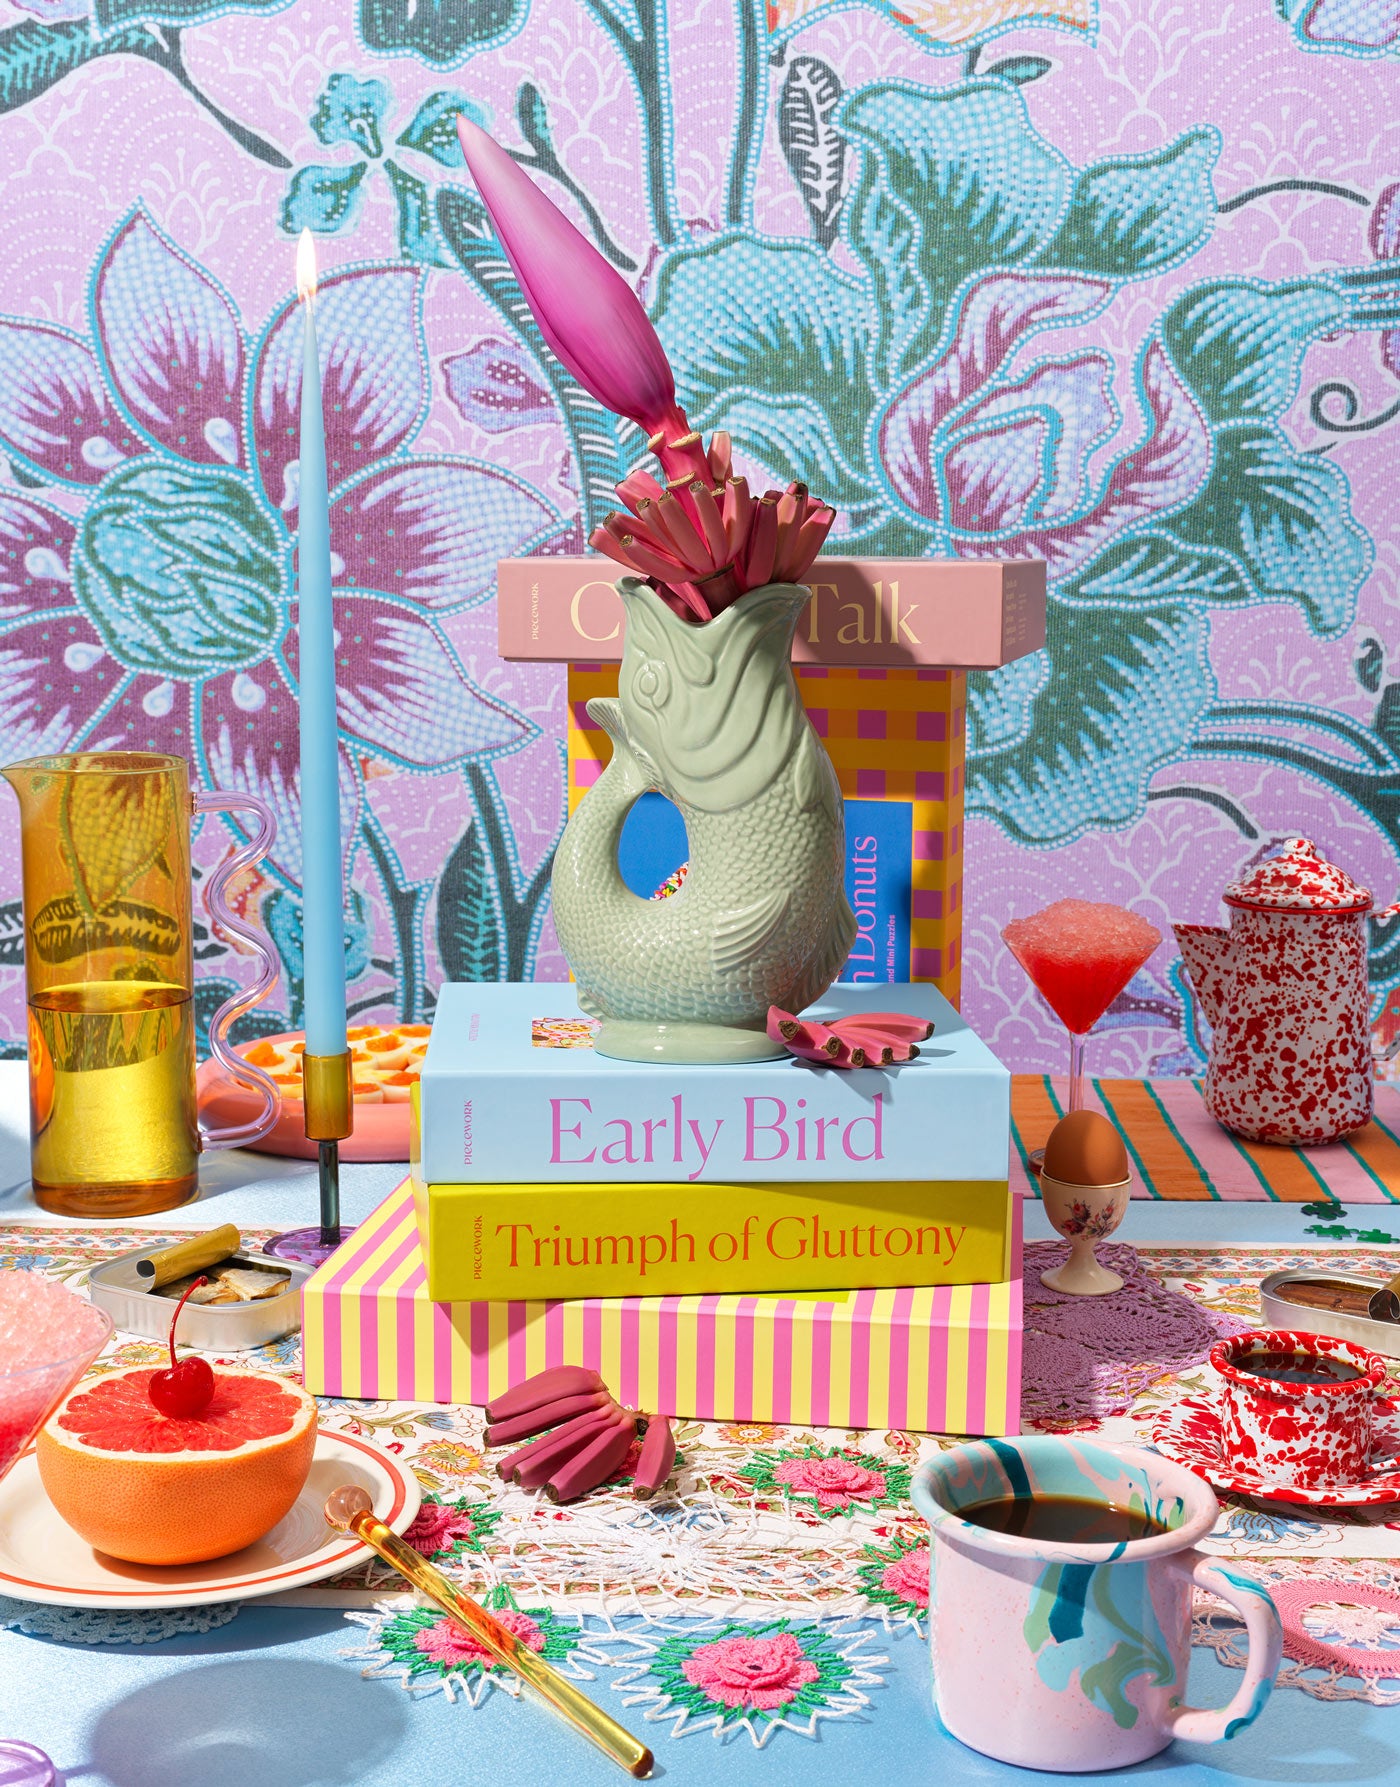 Brunch lifestyle scene showcasing a vibrant scene of puzzle boxes and other gifts and goods on a table